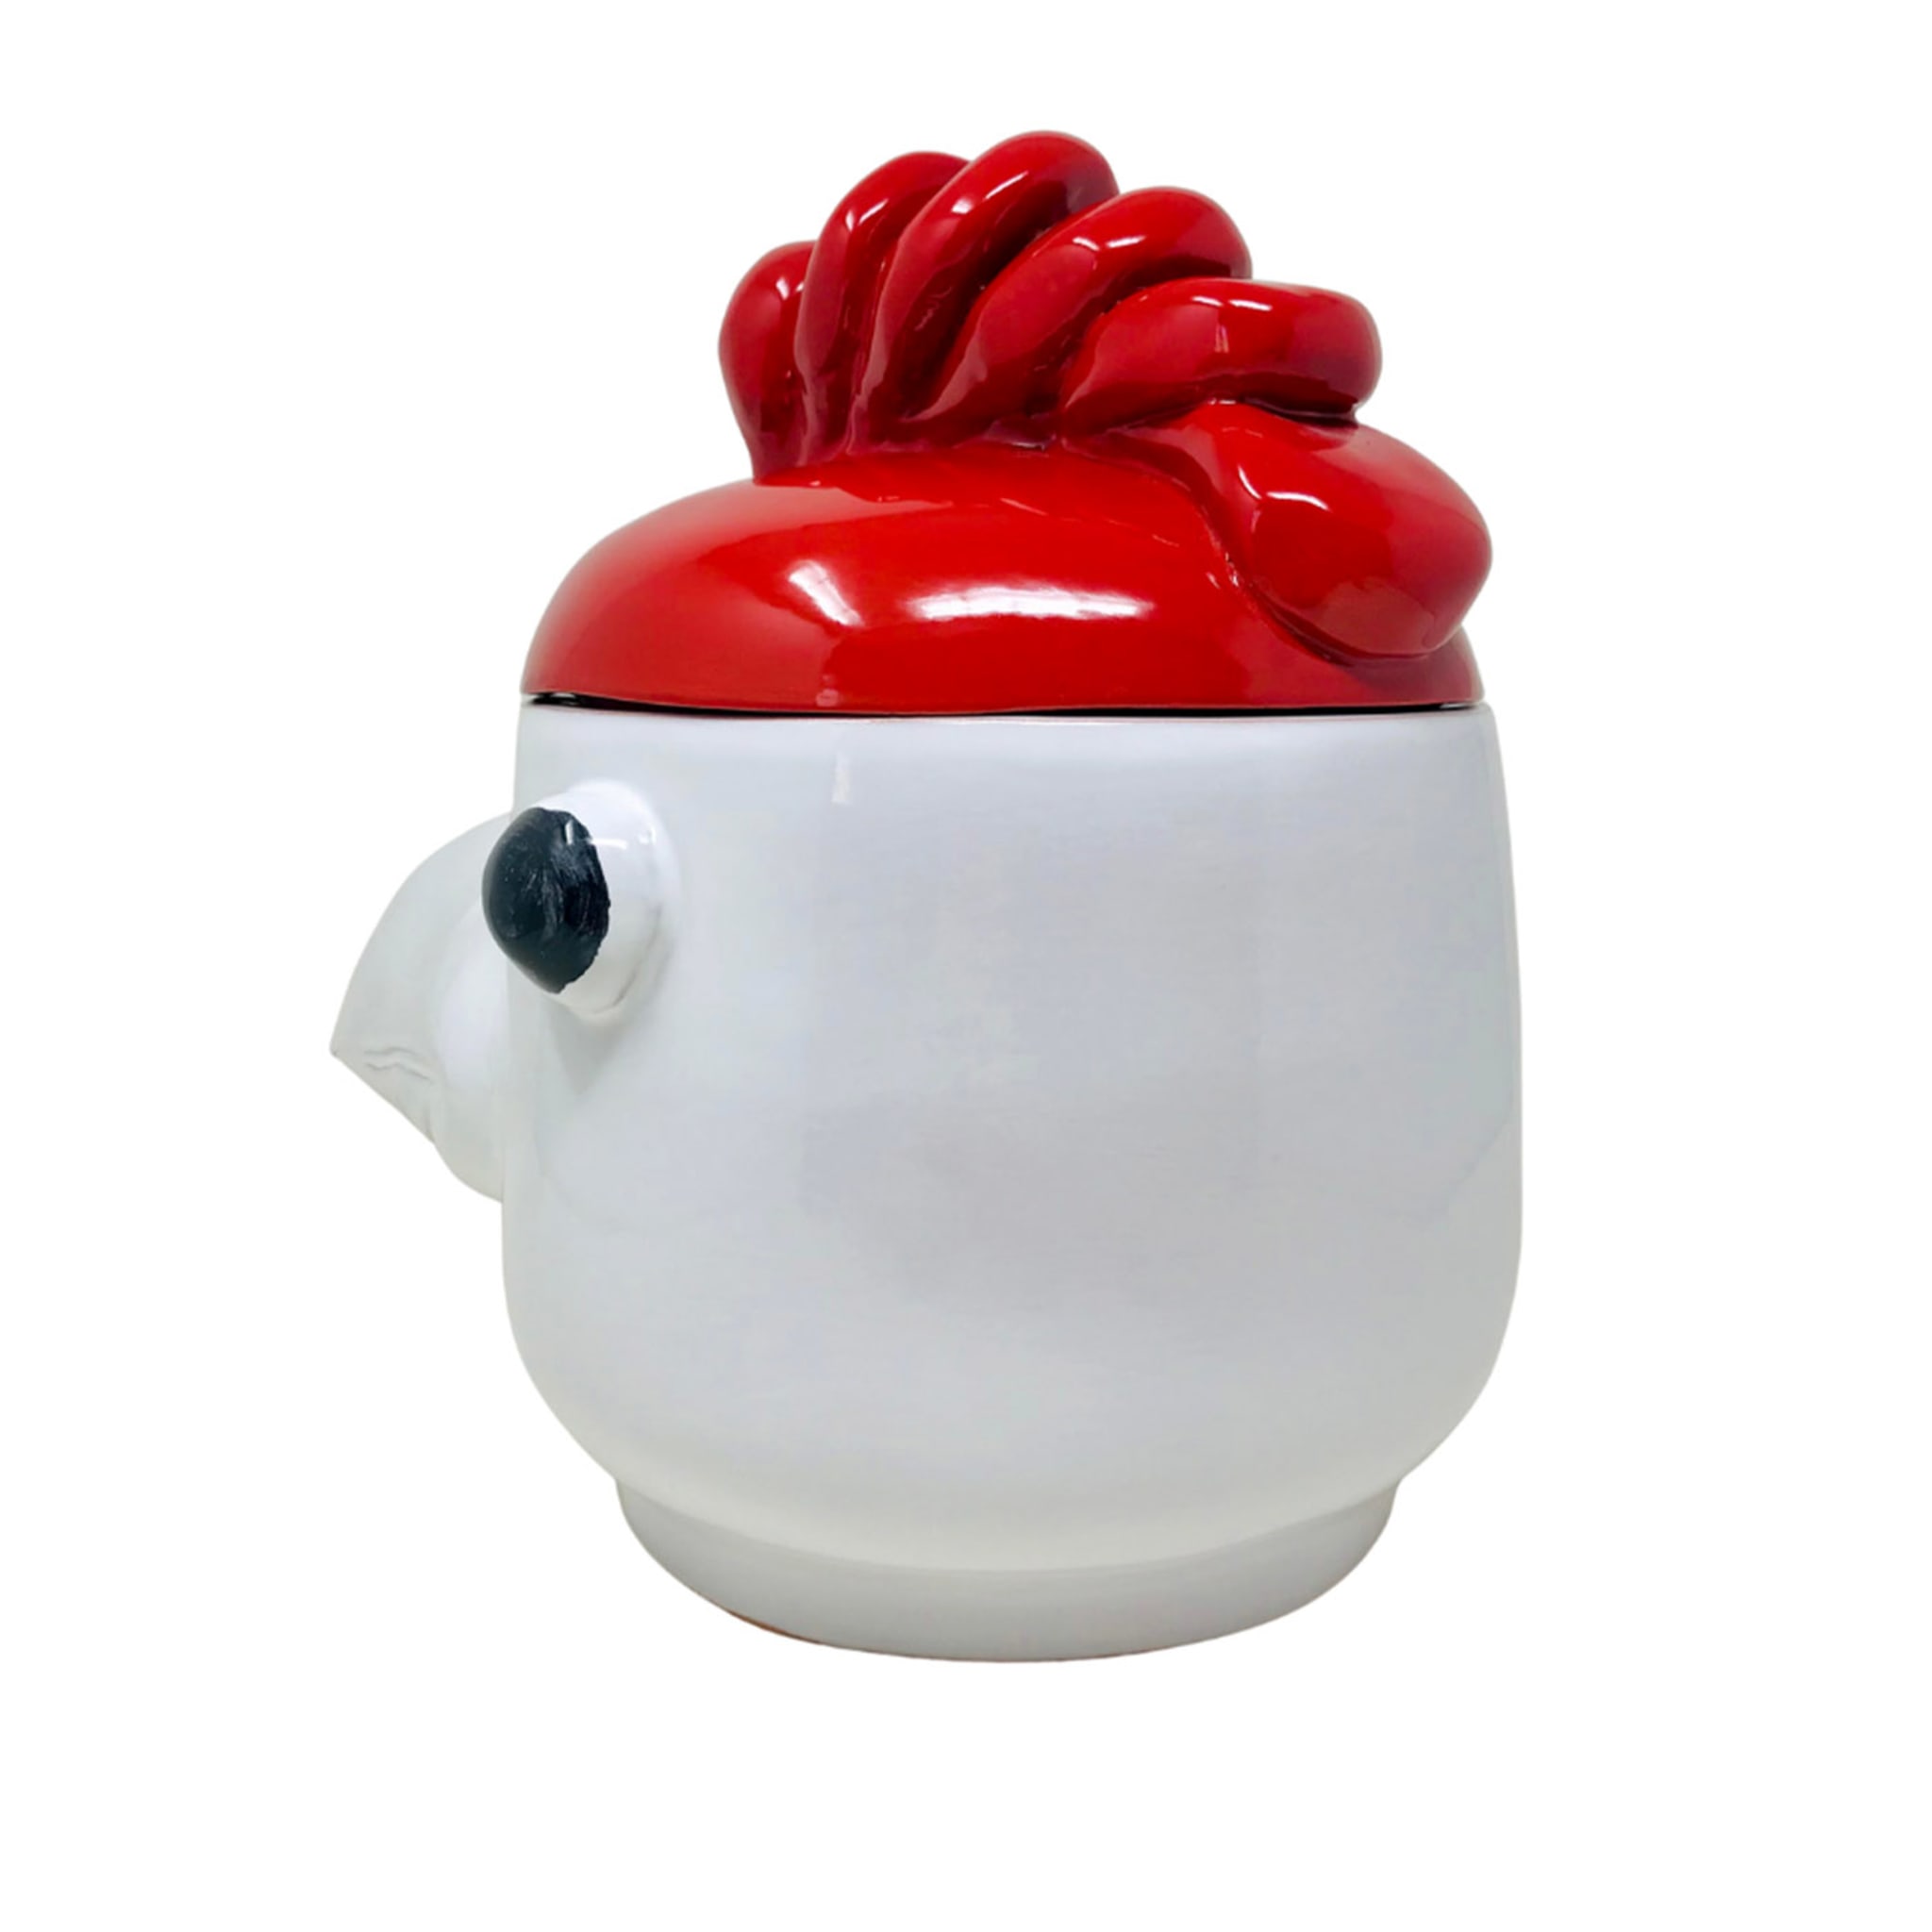 Large Red and White Bird Container with Lid - Alternative view 1